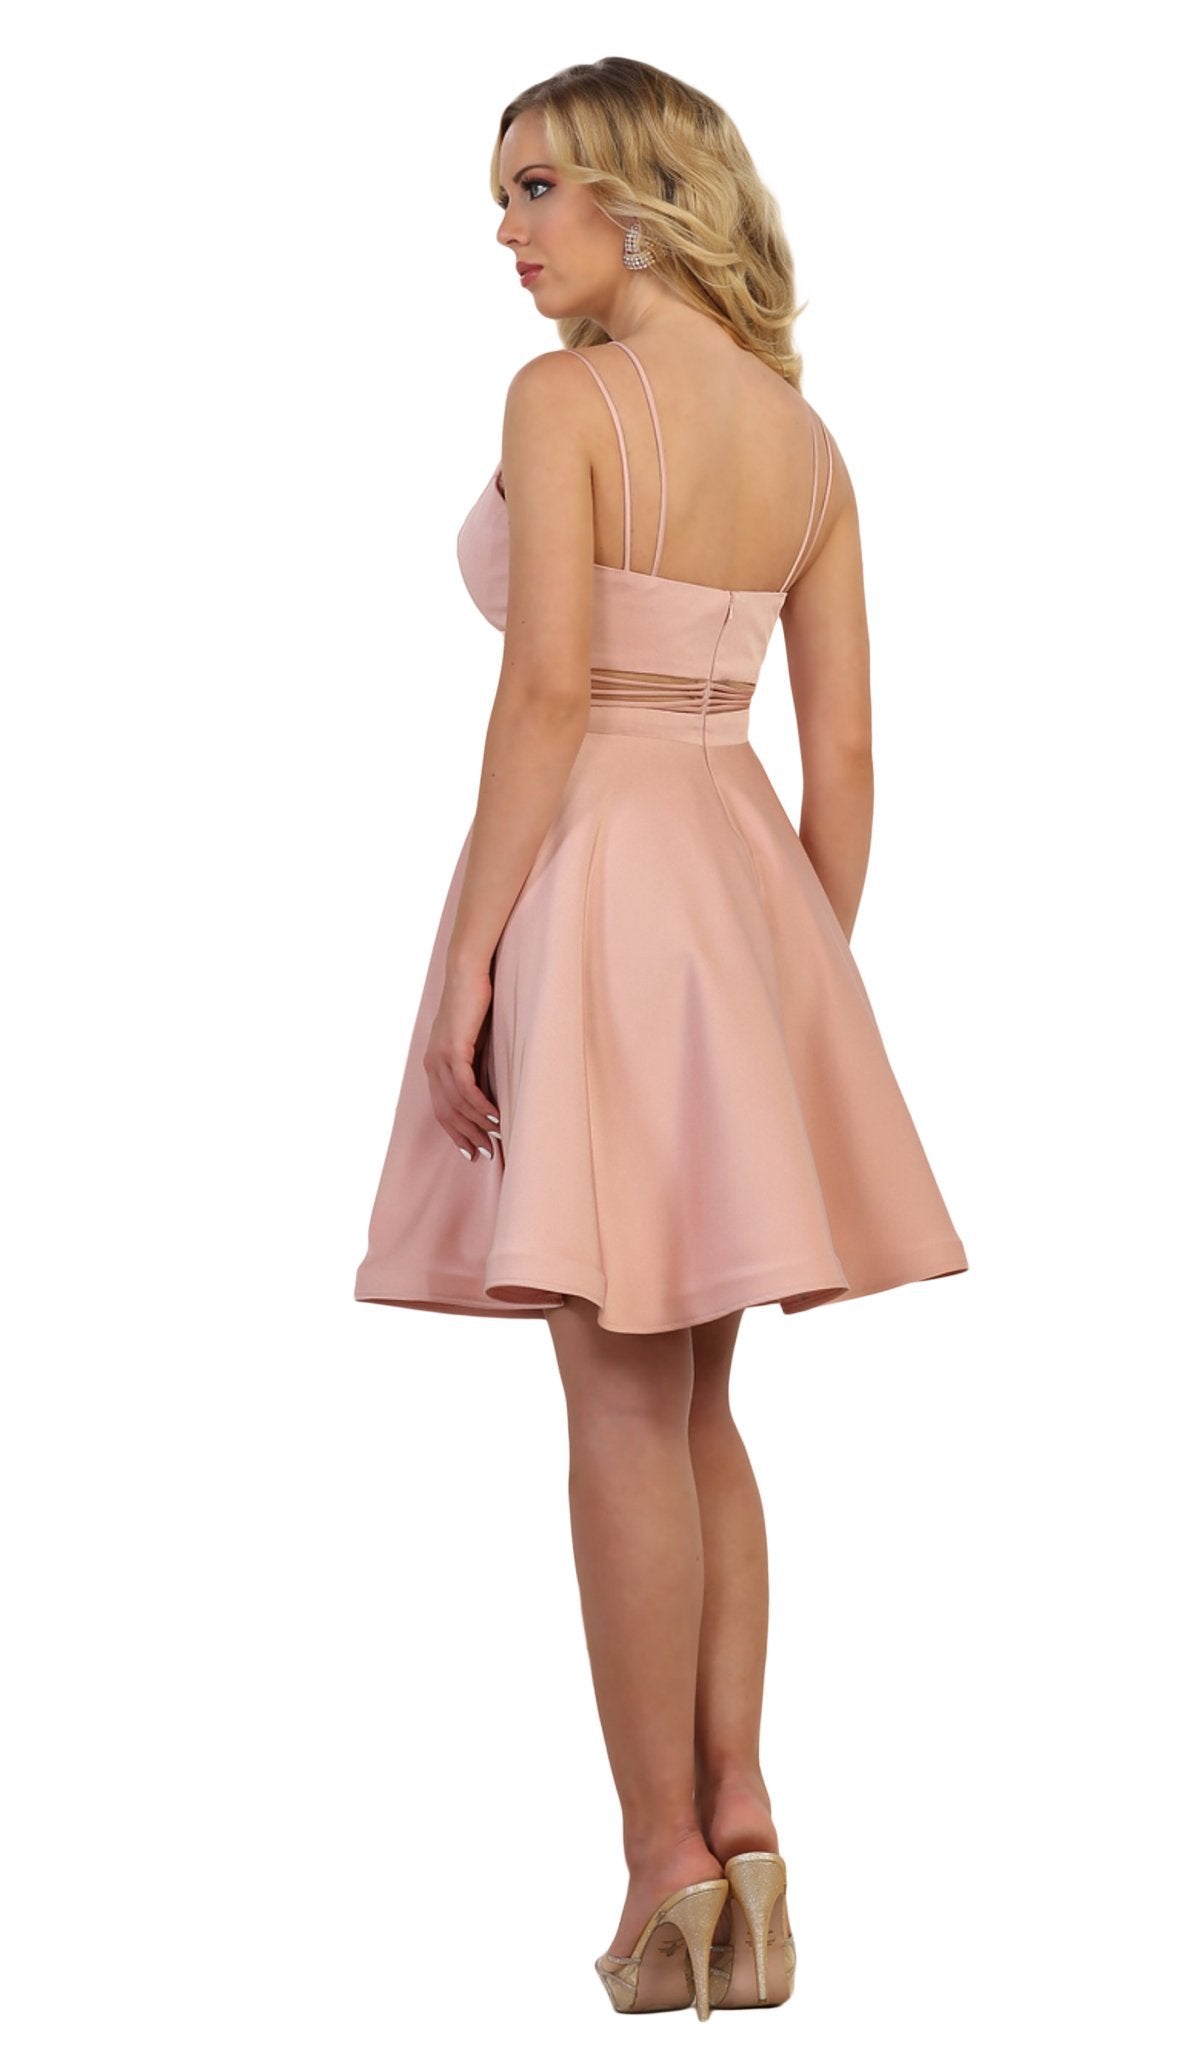 May Queen - MQ1566 Strappy Sweetheart A-Line Cocktail Dress In Pink